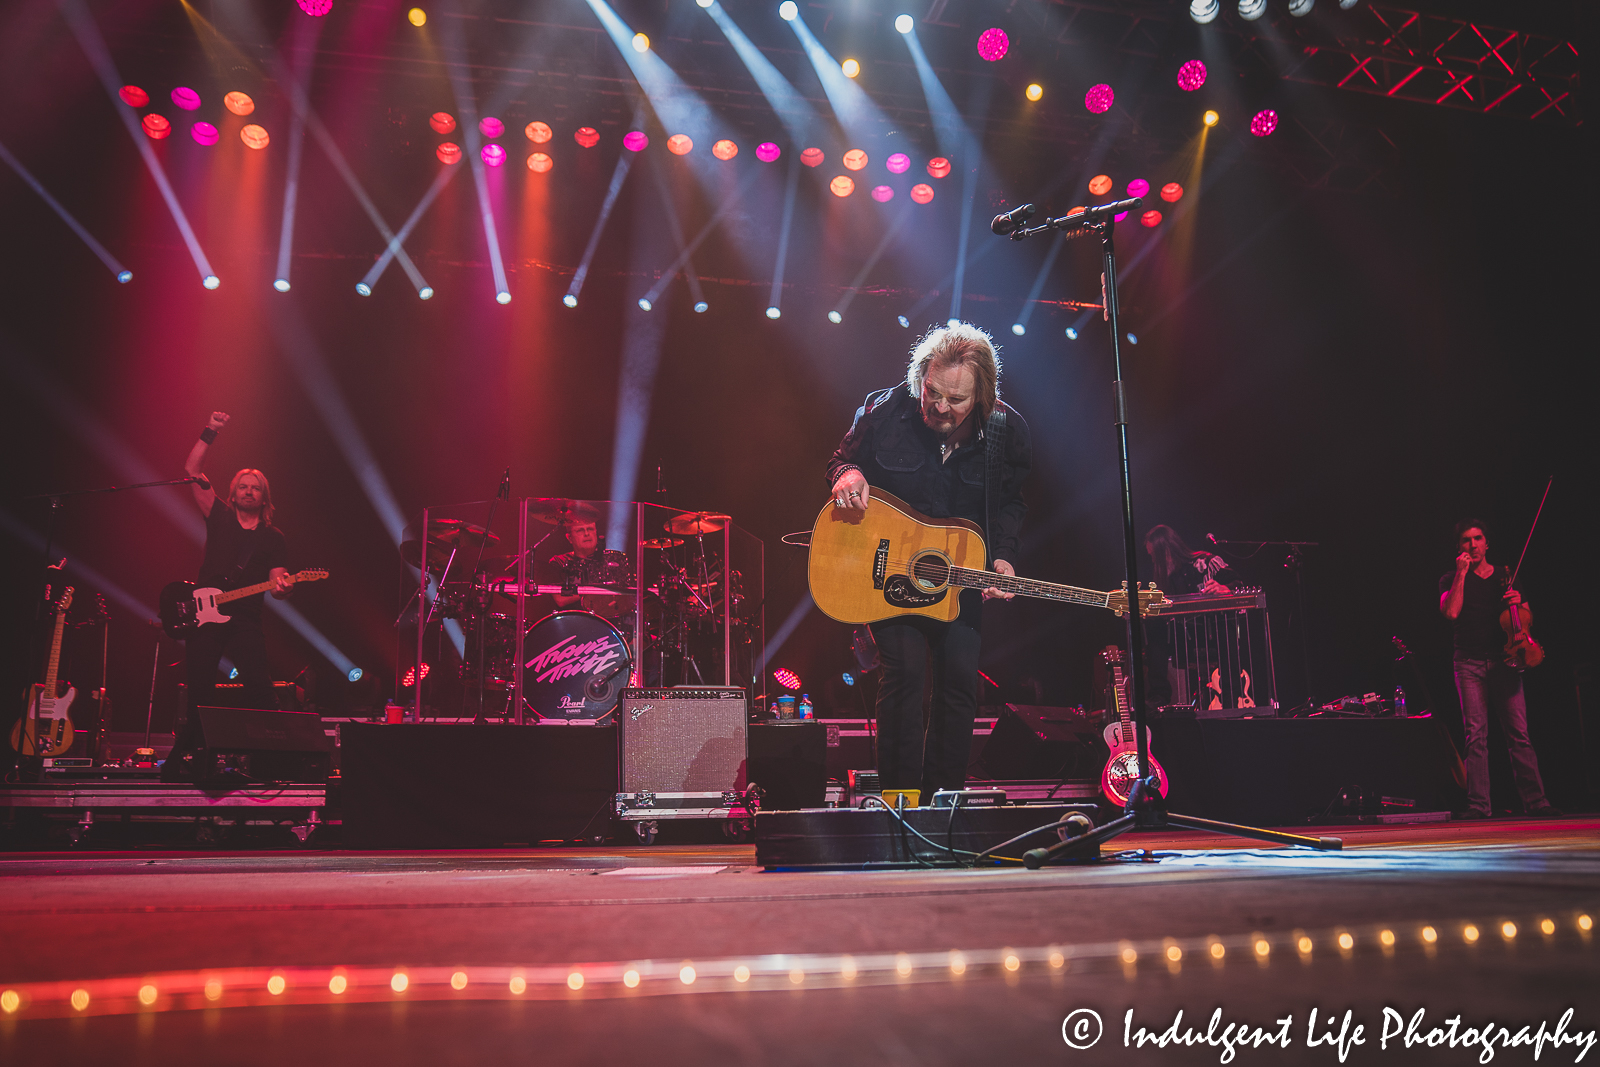 Travis Tritt taking a bow as he closes out his third song "I'm Gonna Be Somebody" at Ameristar Casino Hotel Kansas City on December 3, 2021.